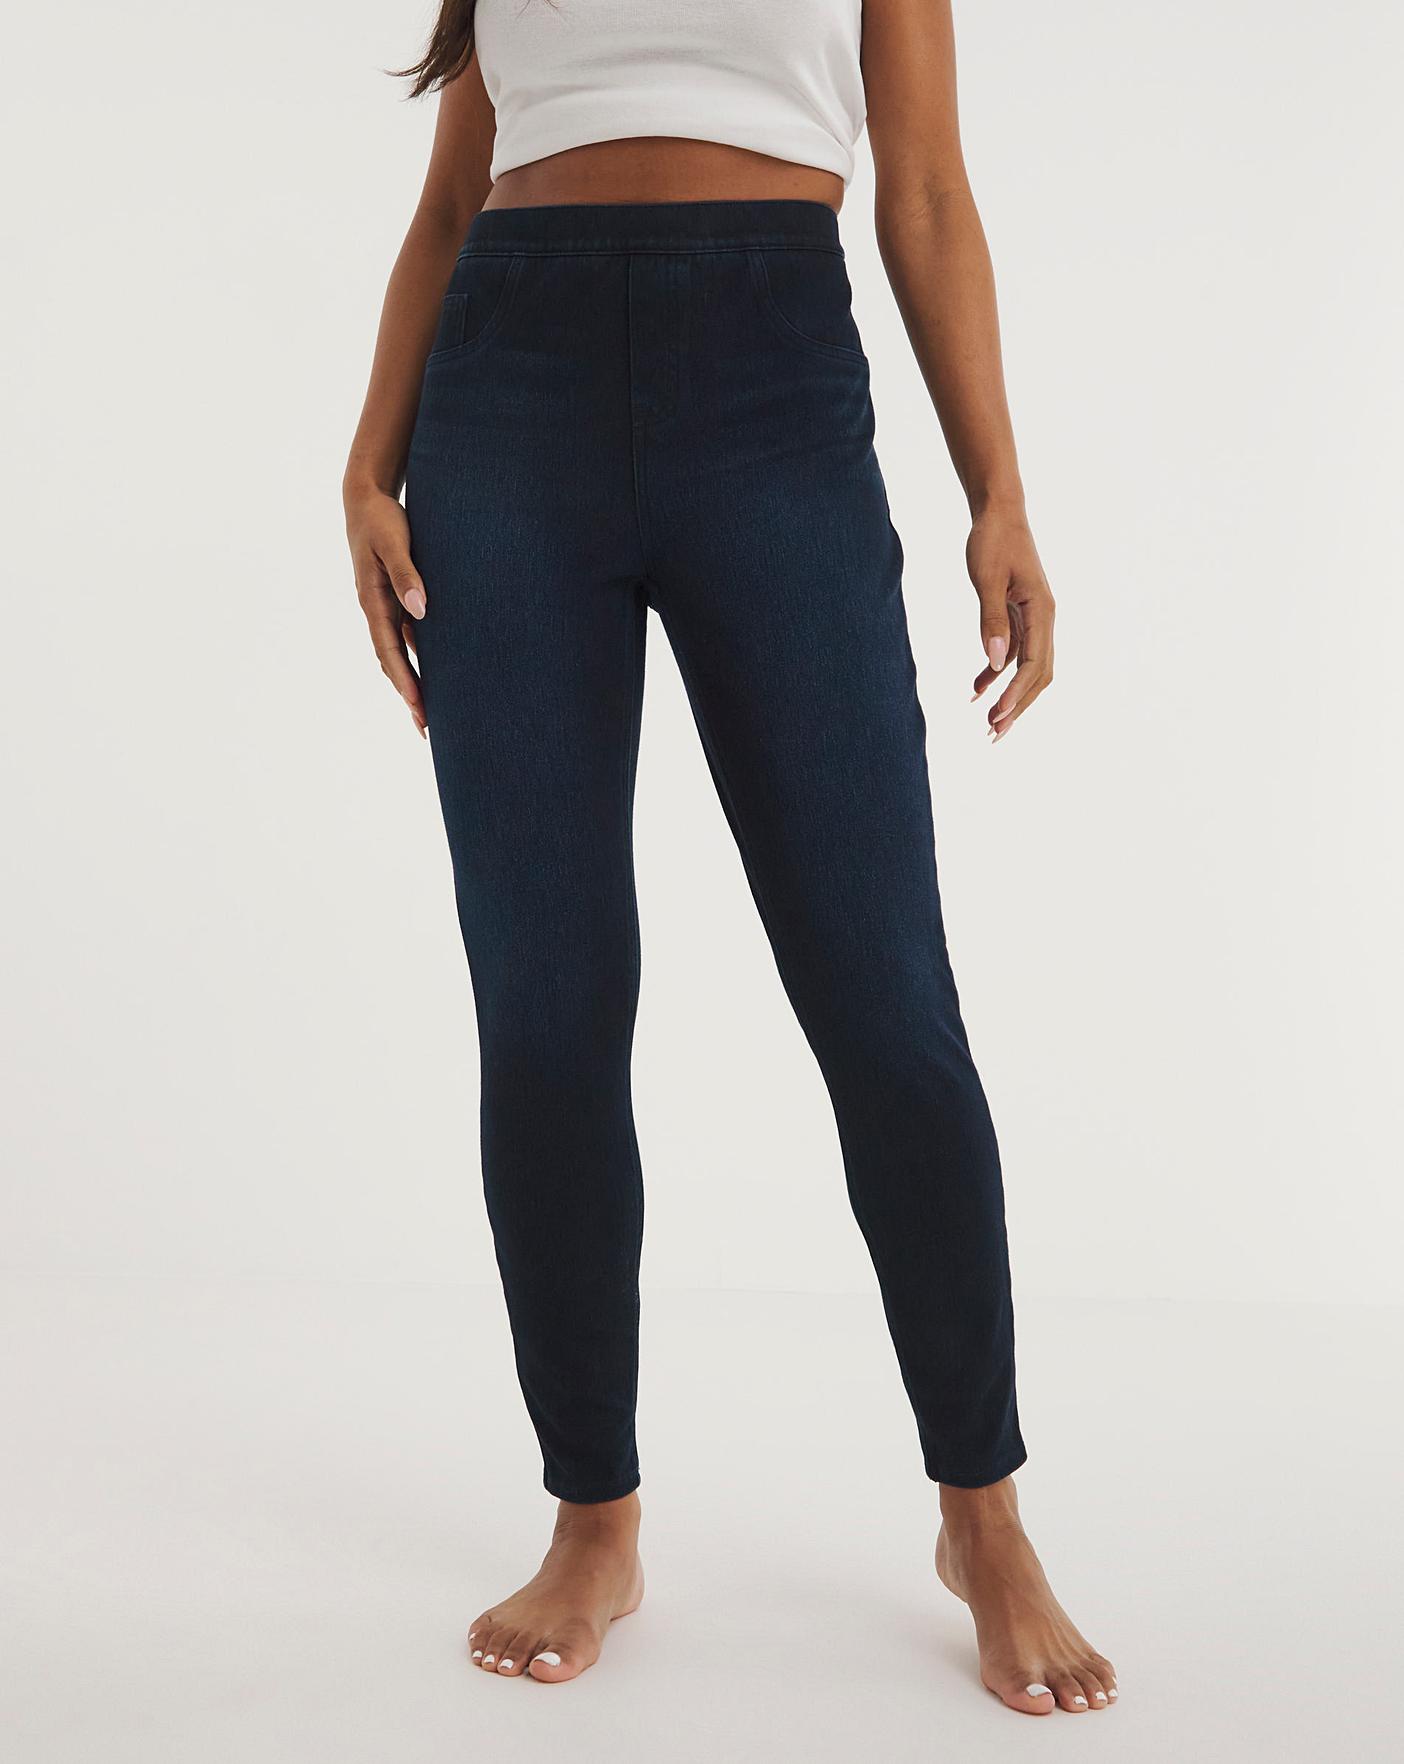 SPANX Jean-ish Ankle Leggings Blue Size S 